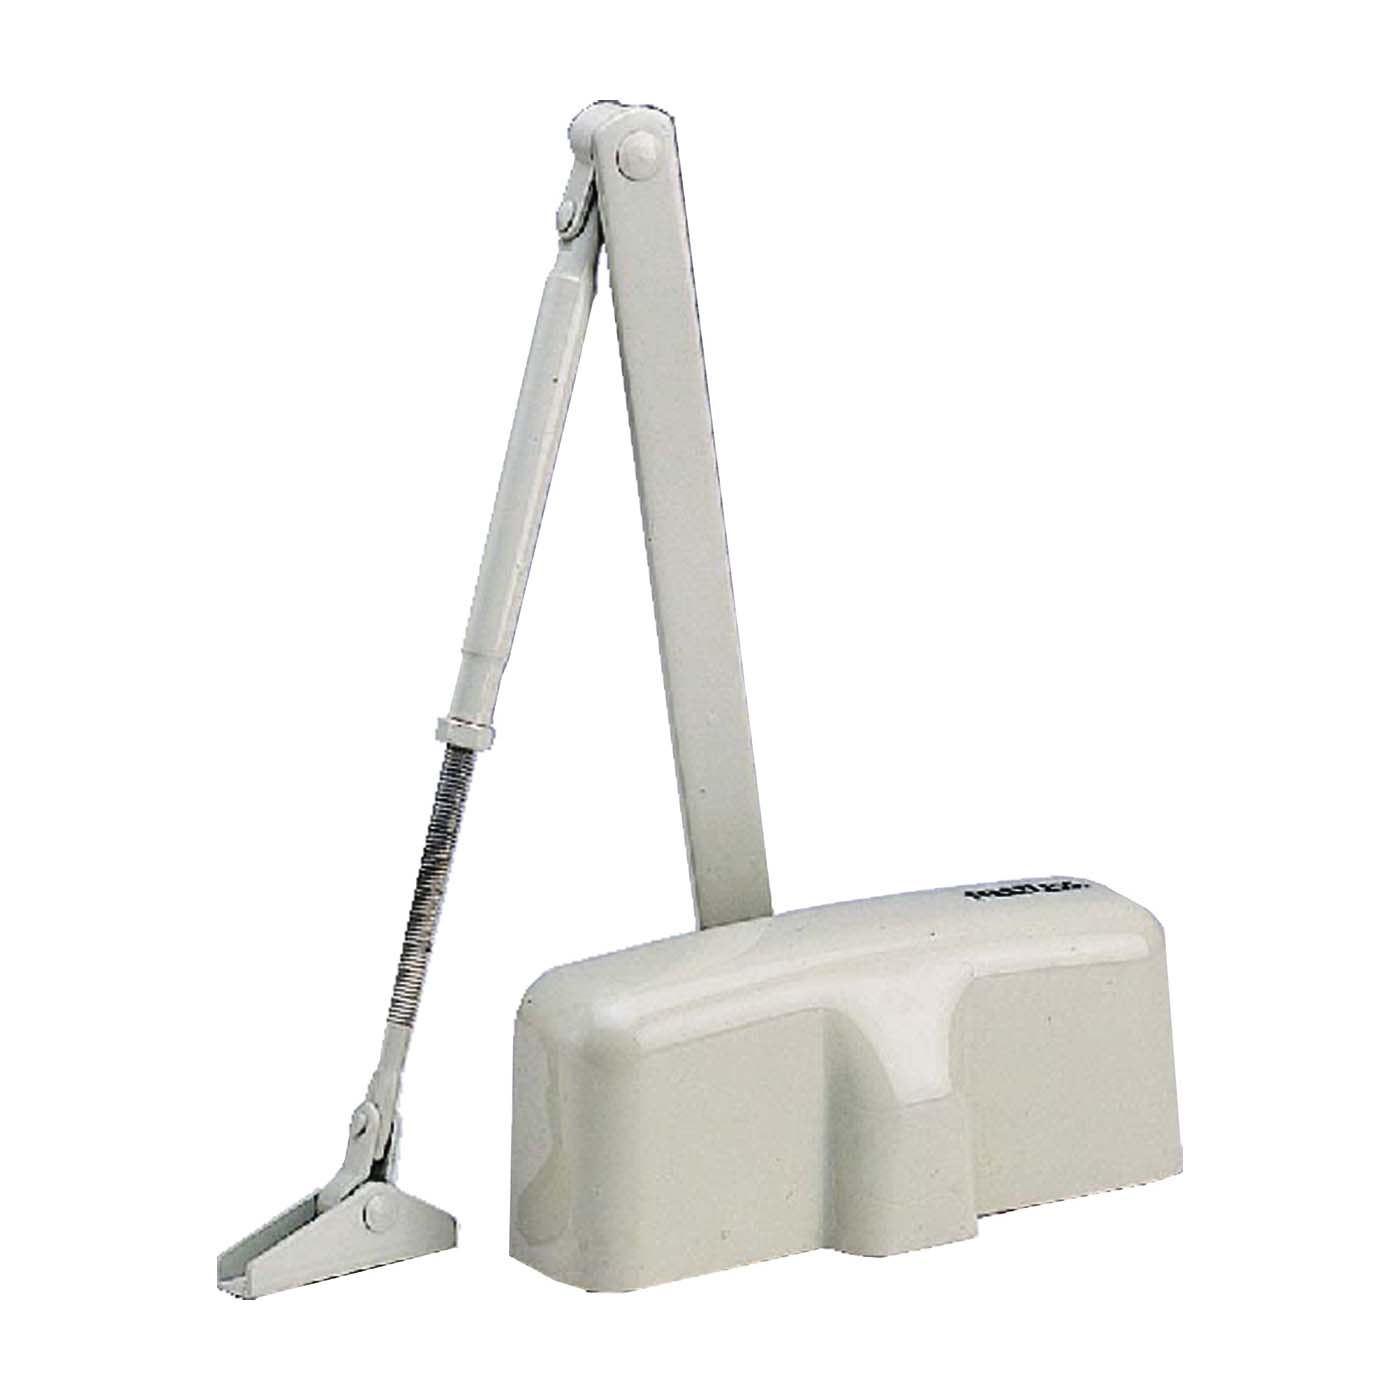 C103-BH-SA-IV Door Closer, Automatic, Aluminum, Ivory, 140 lb, 150 x 19 mm Mounting Hole Distance